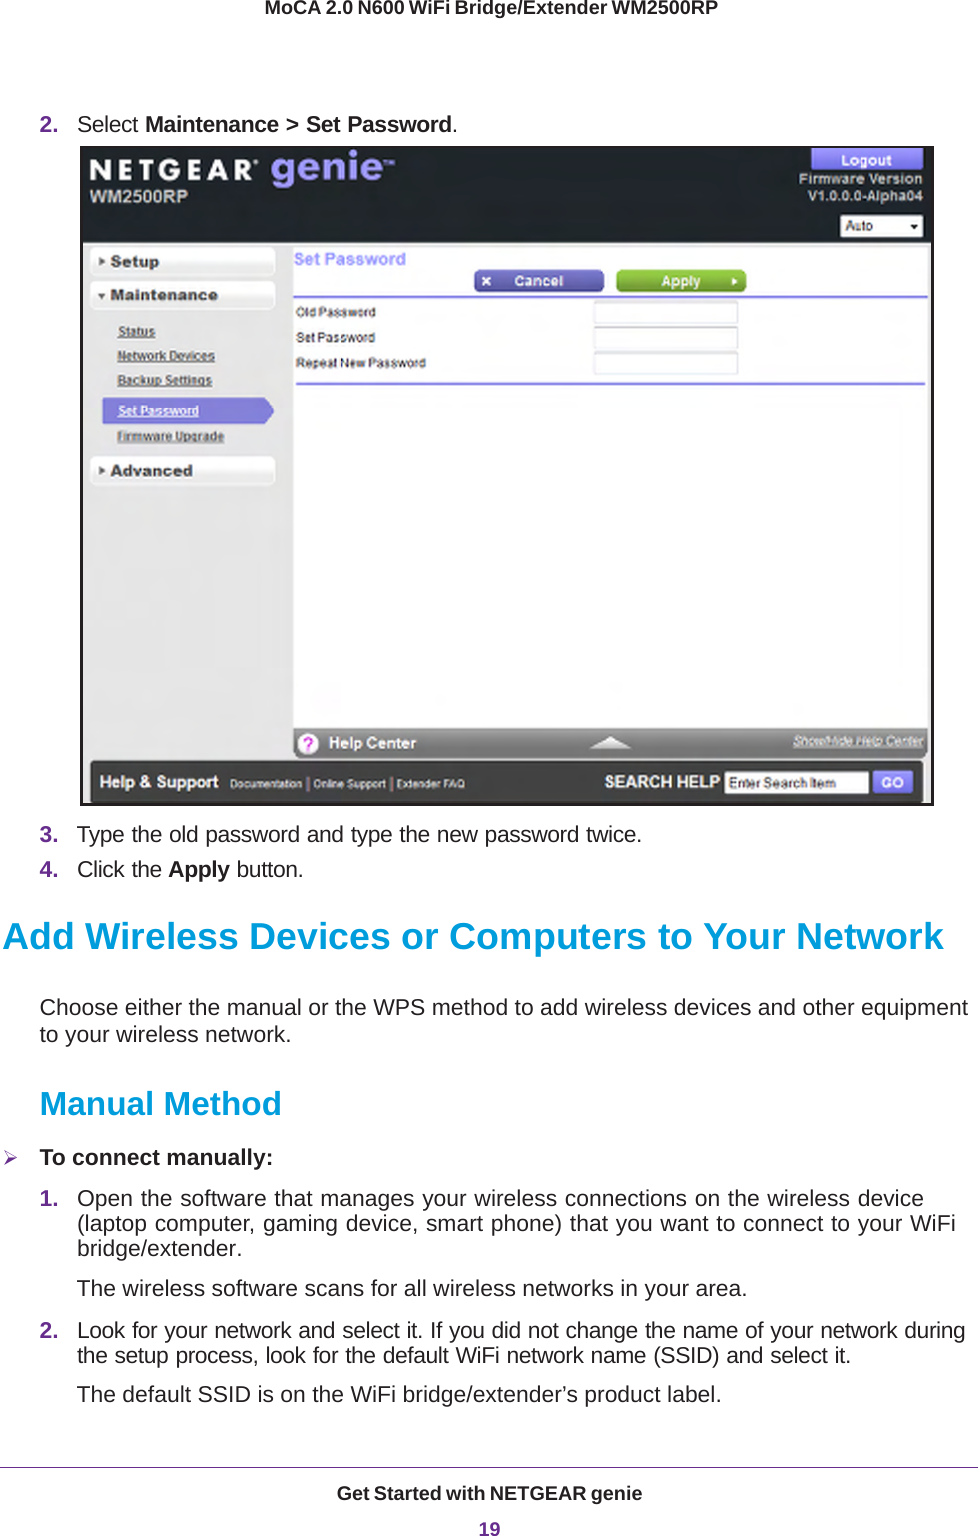 Get Started with NETGEAR genie19 MoCA 2.0 N600 WiFi Bridge/Extender WM2500RP2. Select Maintenance &gt; Set Password.3. Type the old password and type the new password twice.4. Click the Apply button.Add Wireless Devices or Computers to Your NetworkChoose either the manual or the WPS method to add wireless devices and other equipment to your wireless network. Manual MethodTo connect manually:1. Open the software that manages your wireless connections on the wireless device (laptop computer, gaming device, smart phone) that you want to connect to your WiFi bridge/extender.The wireless software scans for all wireless networks in your area.2. Look for your network and select it. If you did not change the name of your network during the setup process, look for the default WiFi network name (SSID) and select it. The default SSID is on the WiFi bridge/extender’s product label.